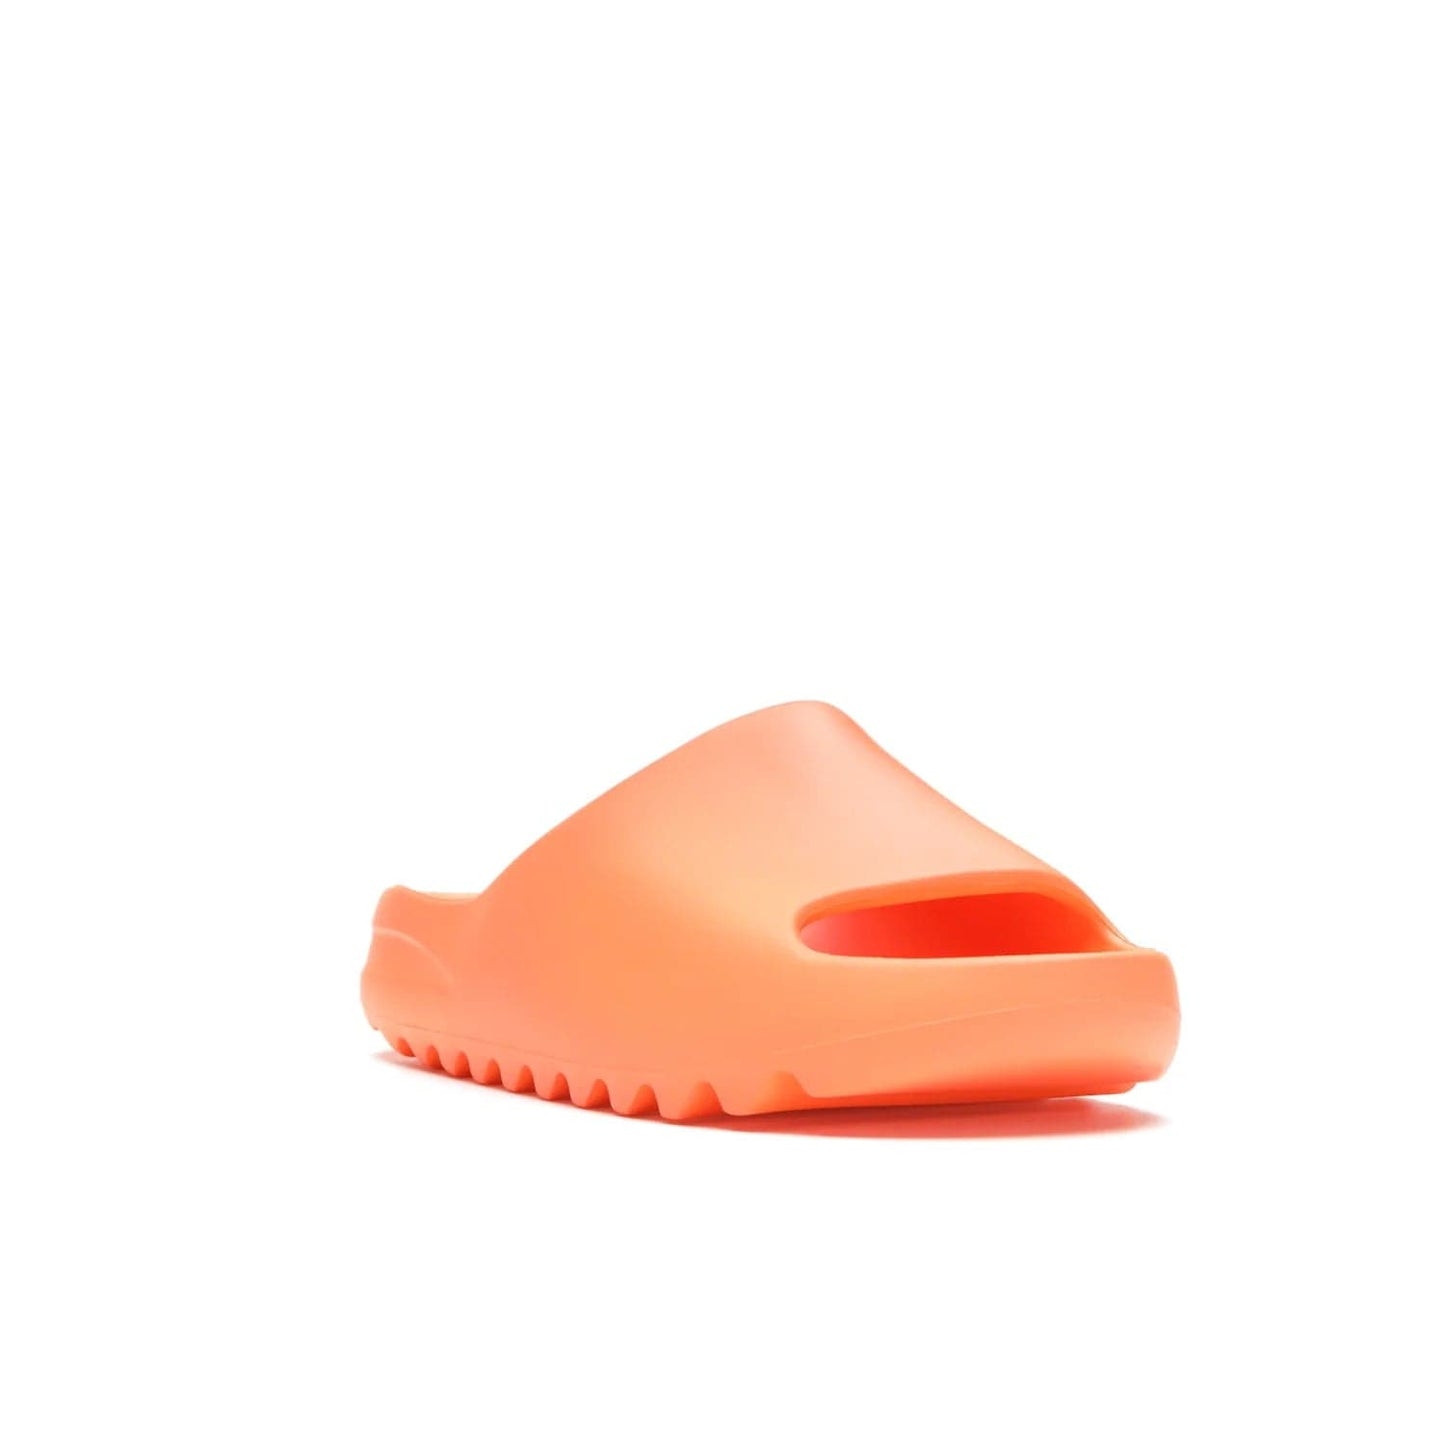 adidas Yeezy Slide Enflame Orange - Image 7 - Only at www.BallersClubKickz.com - Limited edition adidas Yeezy Slide featuring a bold Enflame Orange upper and EVA foam construction. Grooved outsole for traction and support. Released June 2021. Perfect for summer.